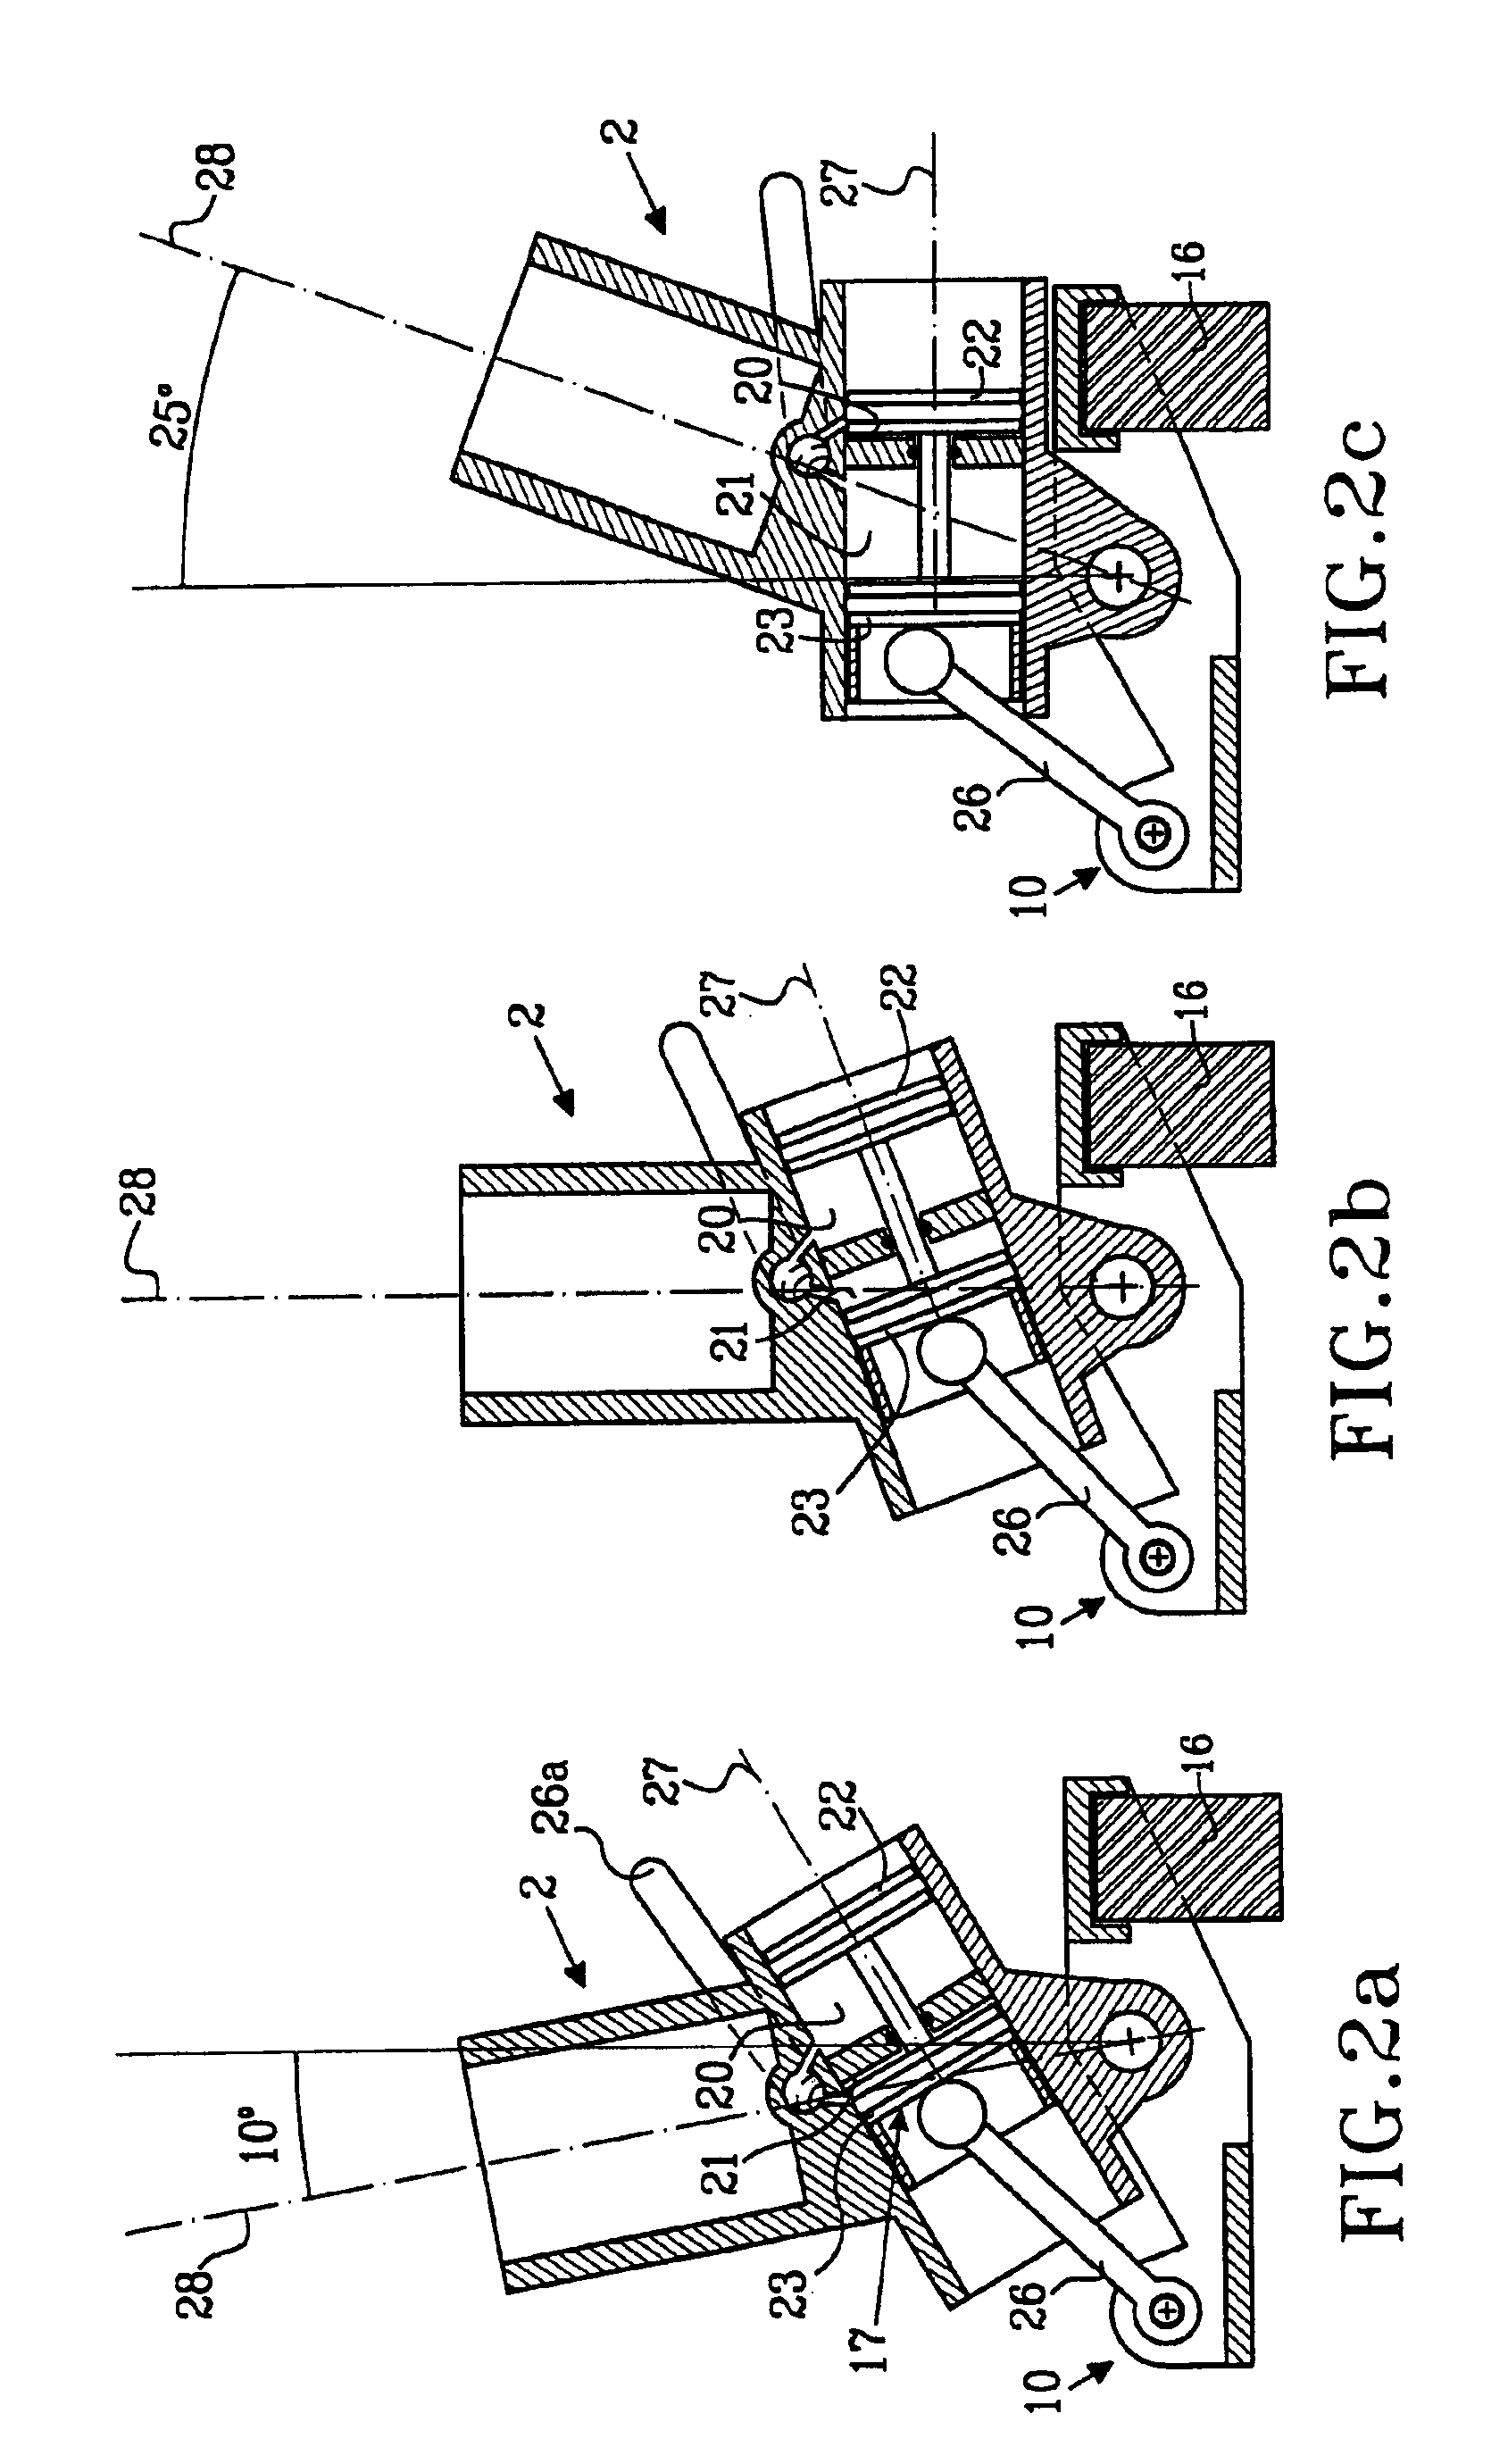 Device in a leg prosthesis